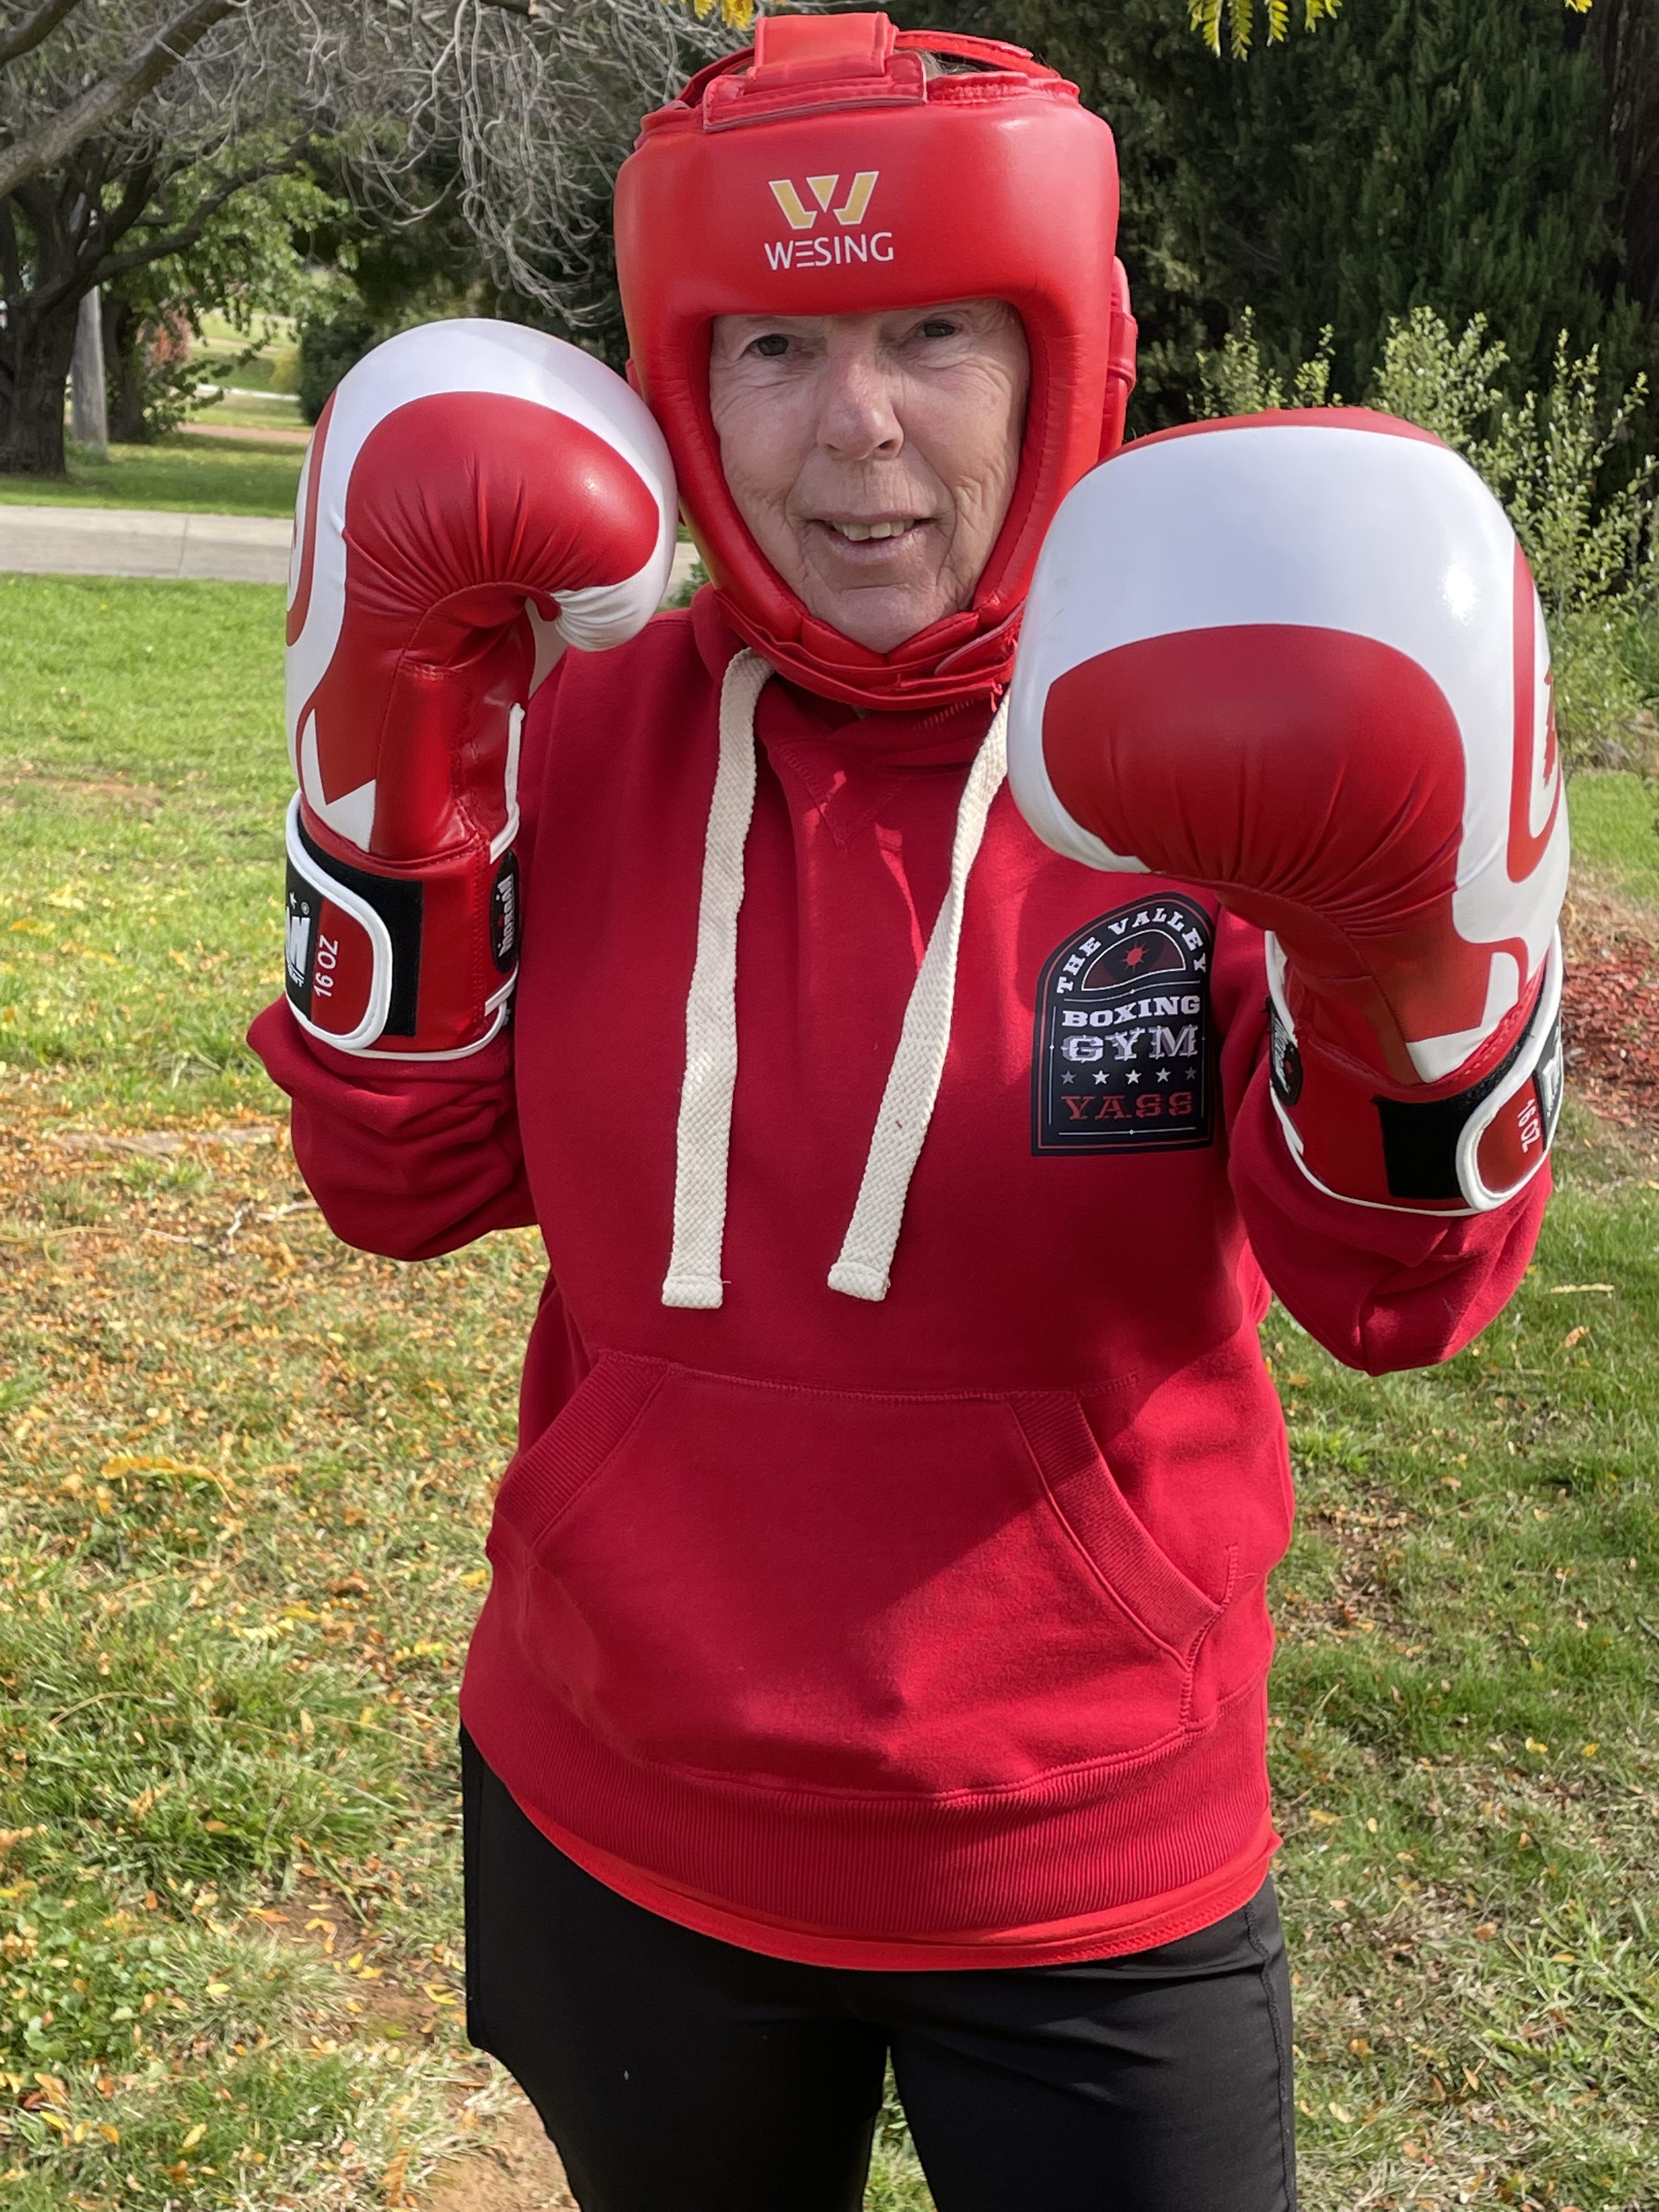 Boxing helps Jennifer McKenna punch above her weight in life